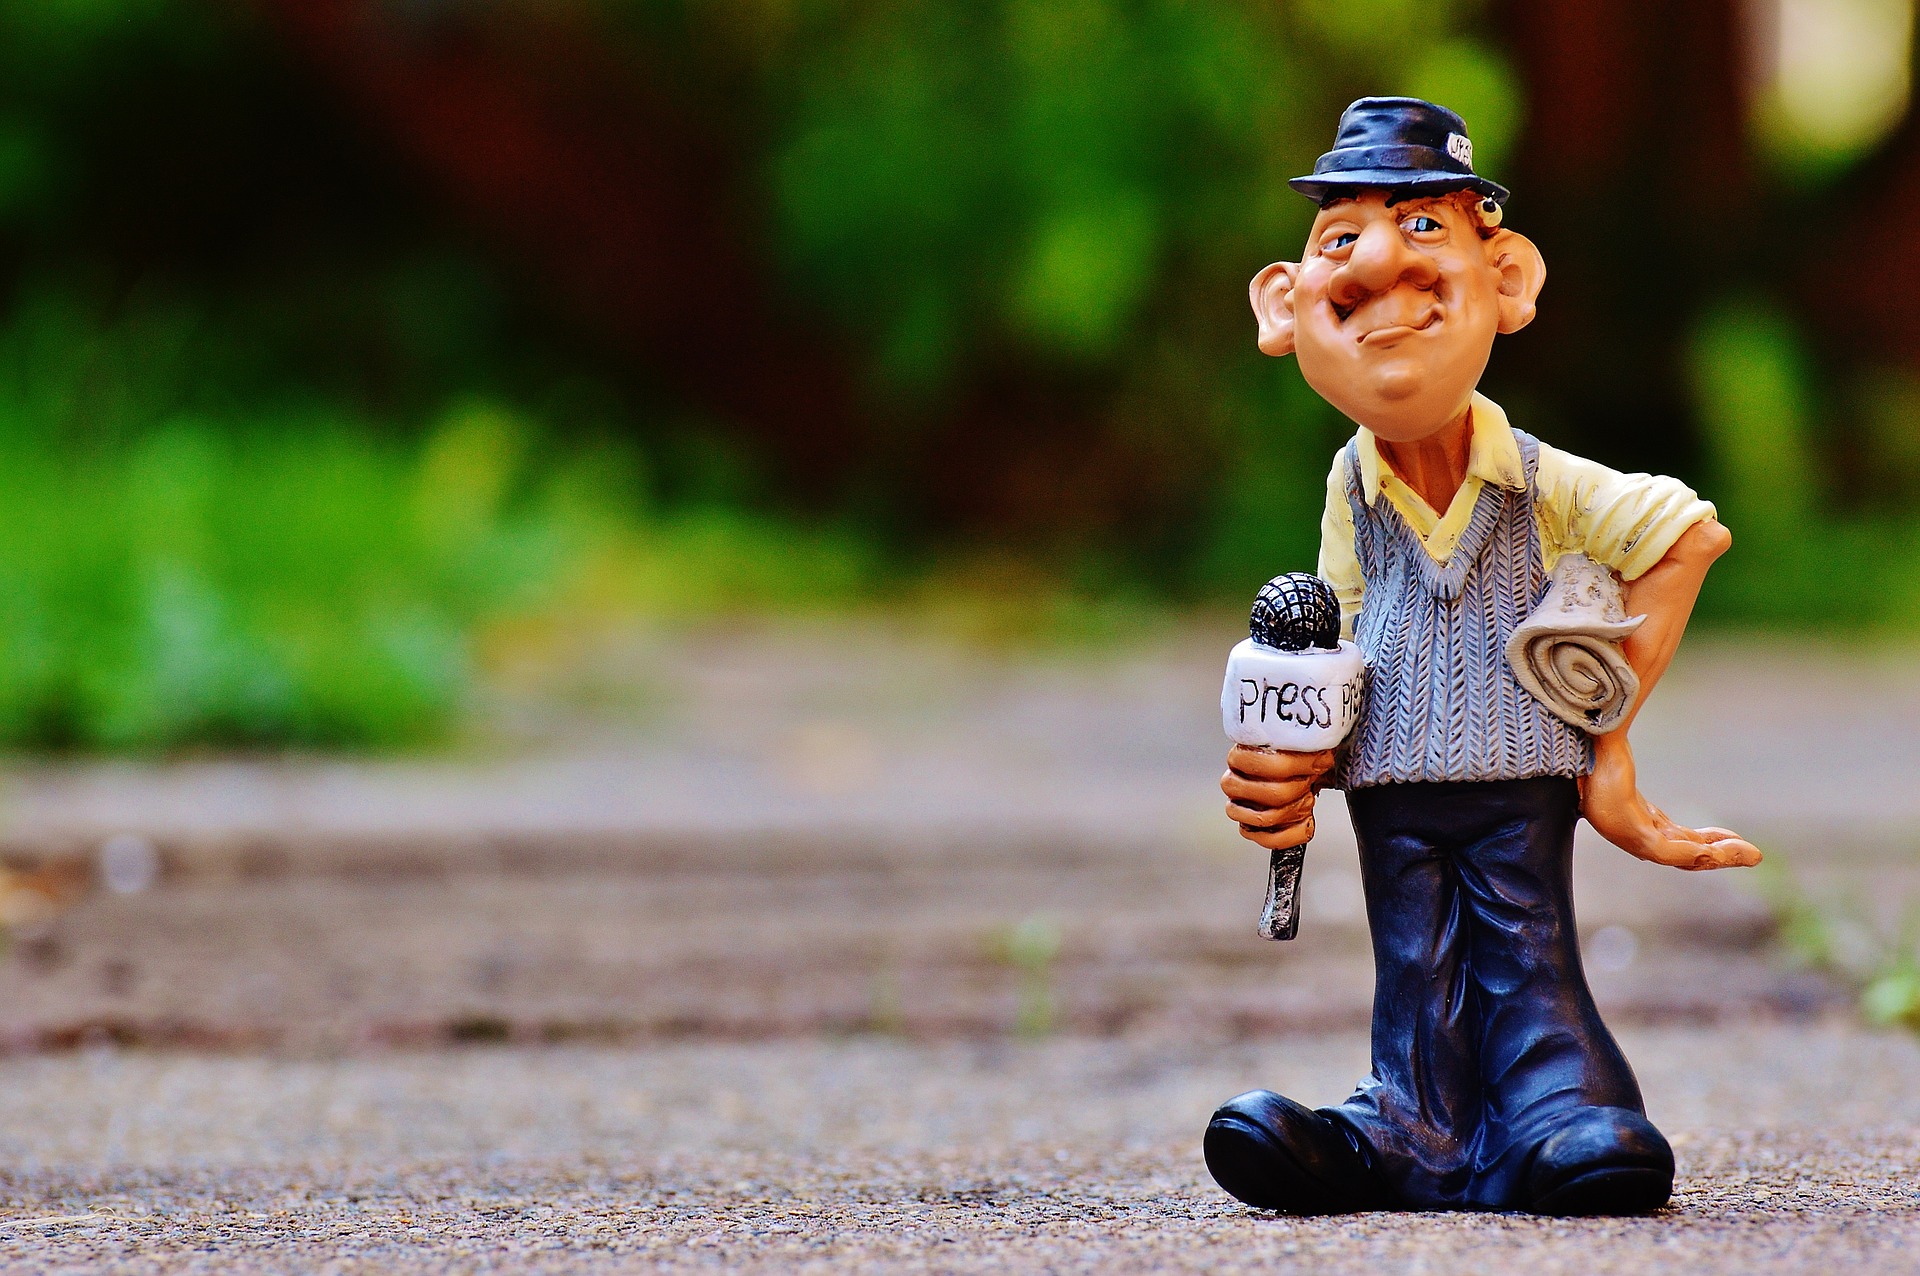 photo of a tacky lawn ornament that looks like an elderly journalist holding a microphone with the word 